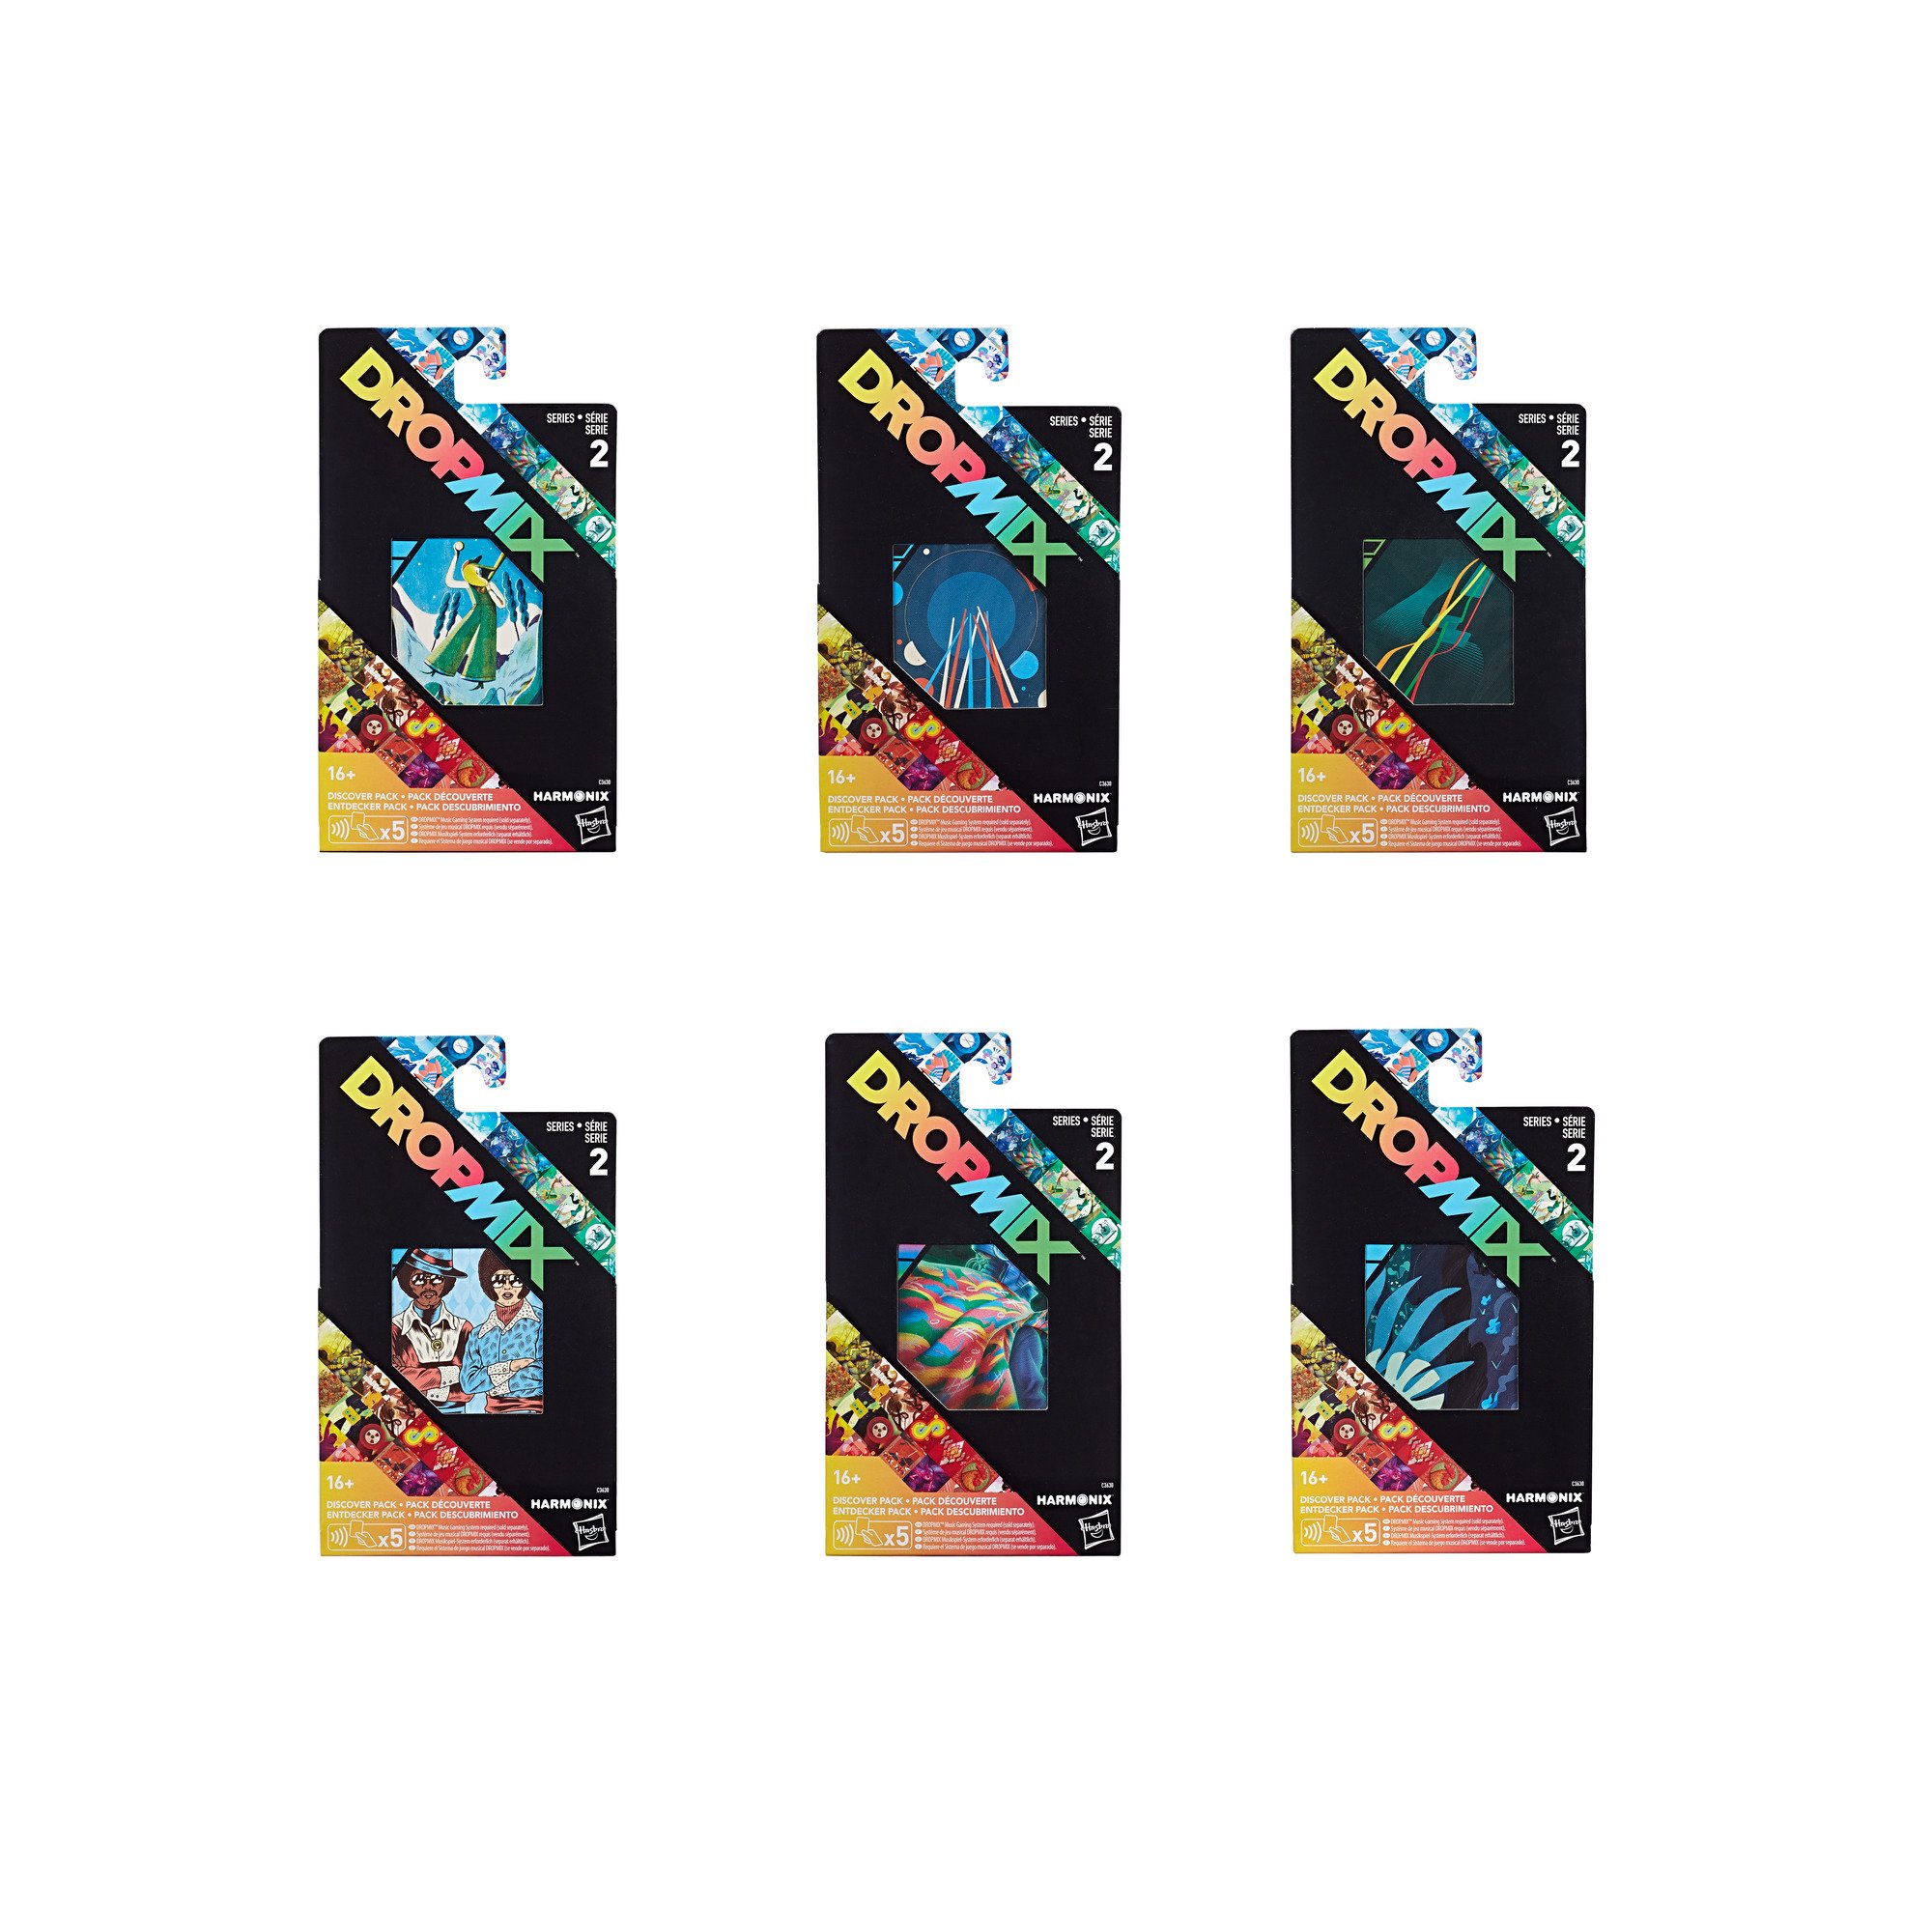 DropMix Discover Packs Series 2 (Cards may vary) Single Pack